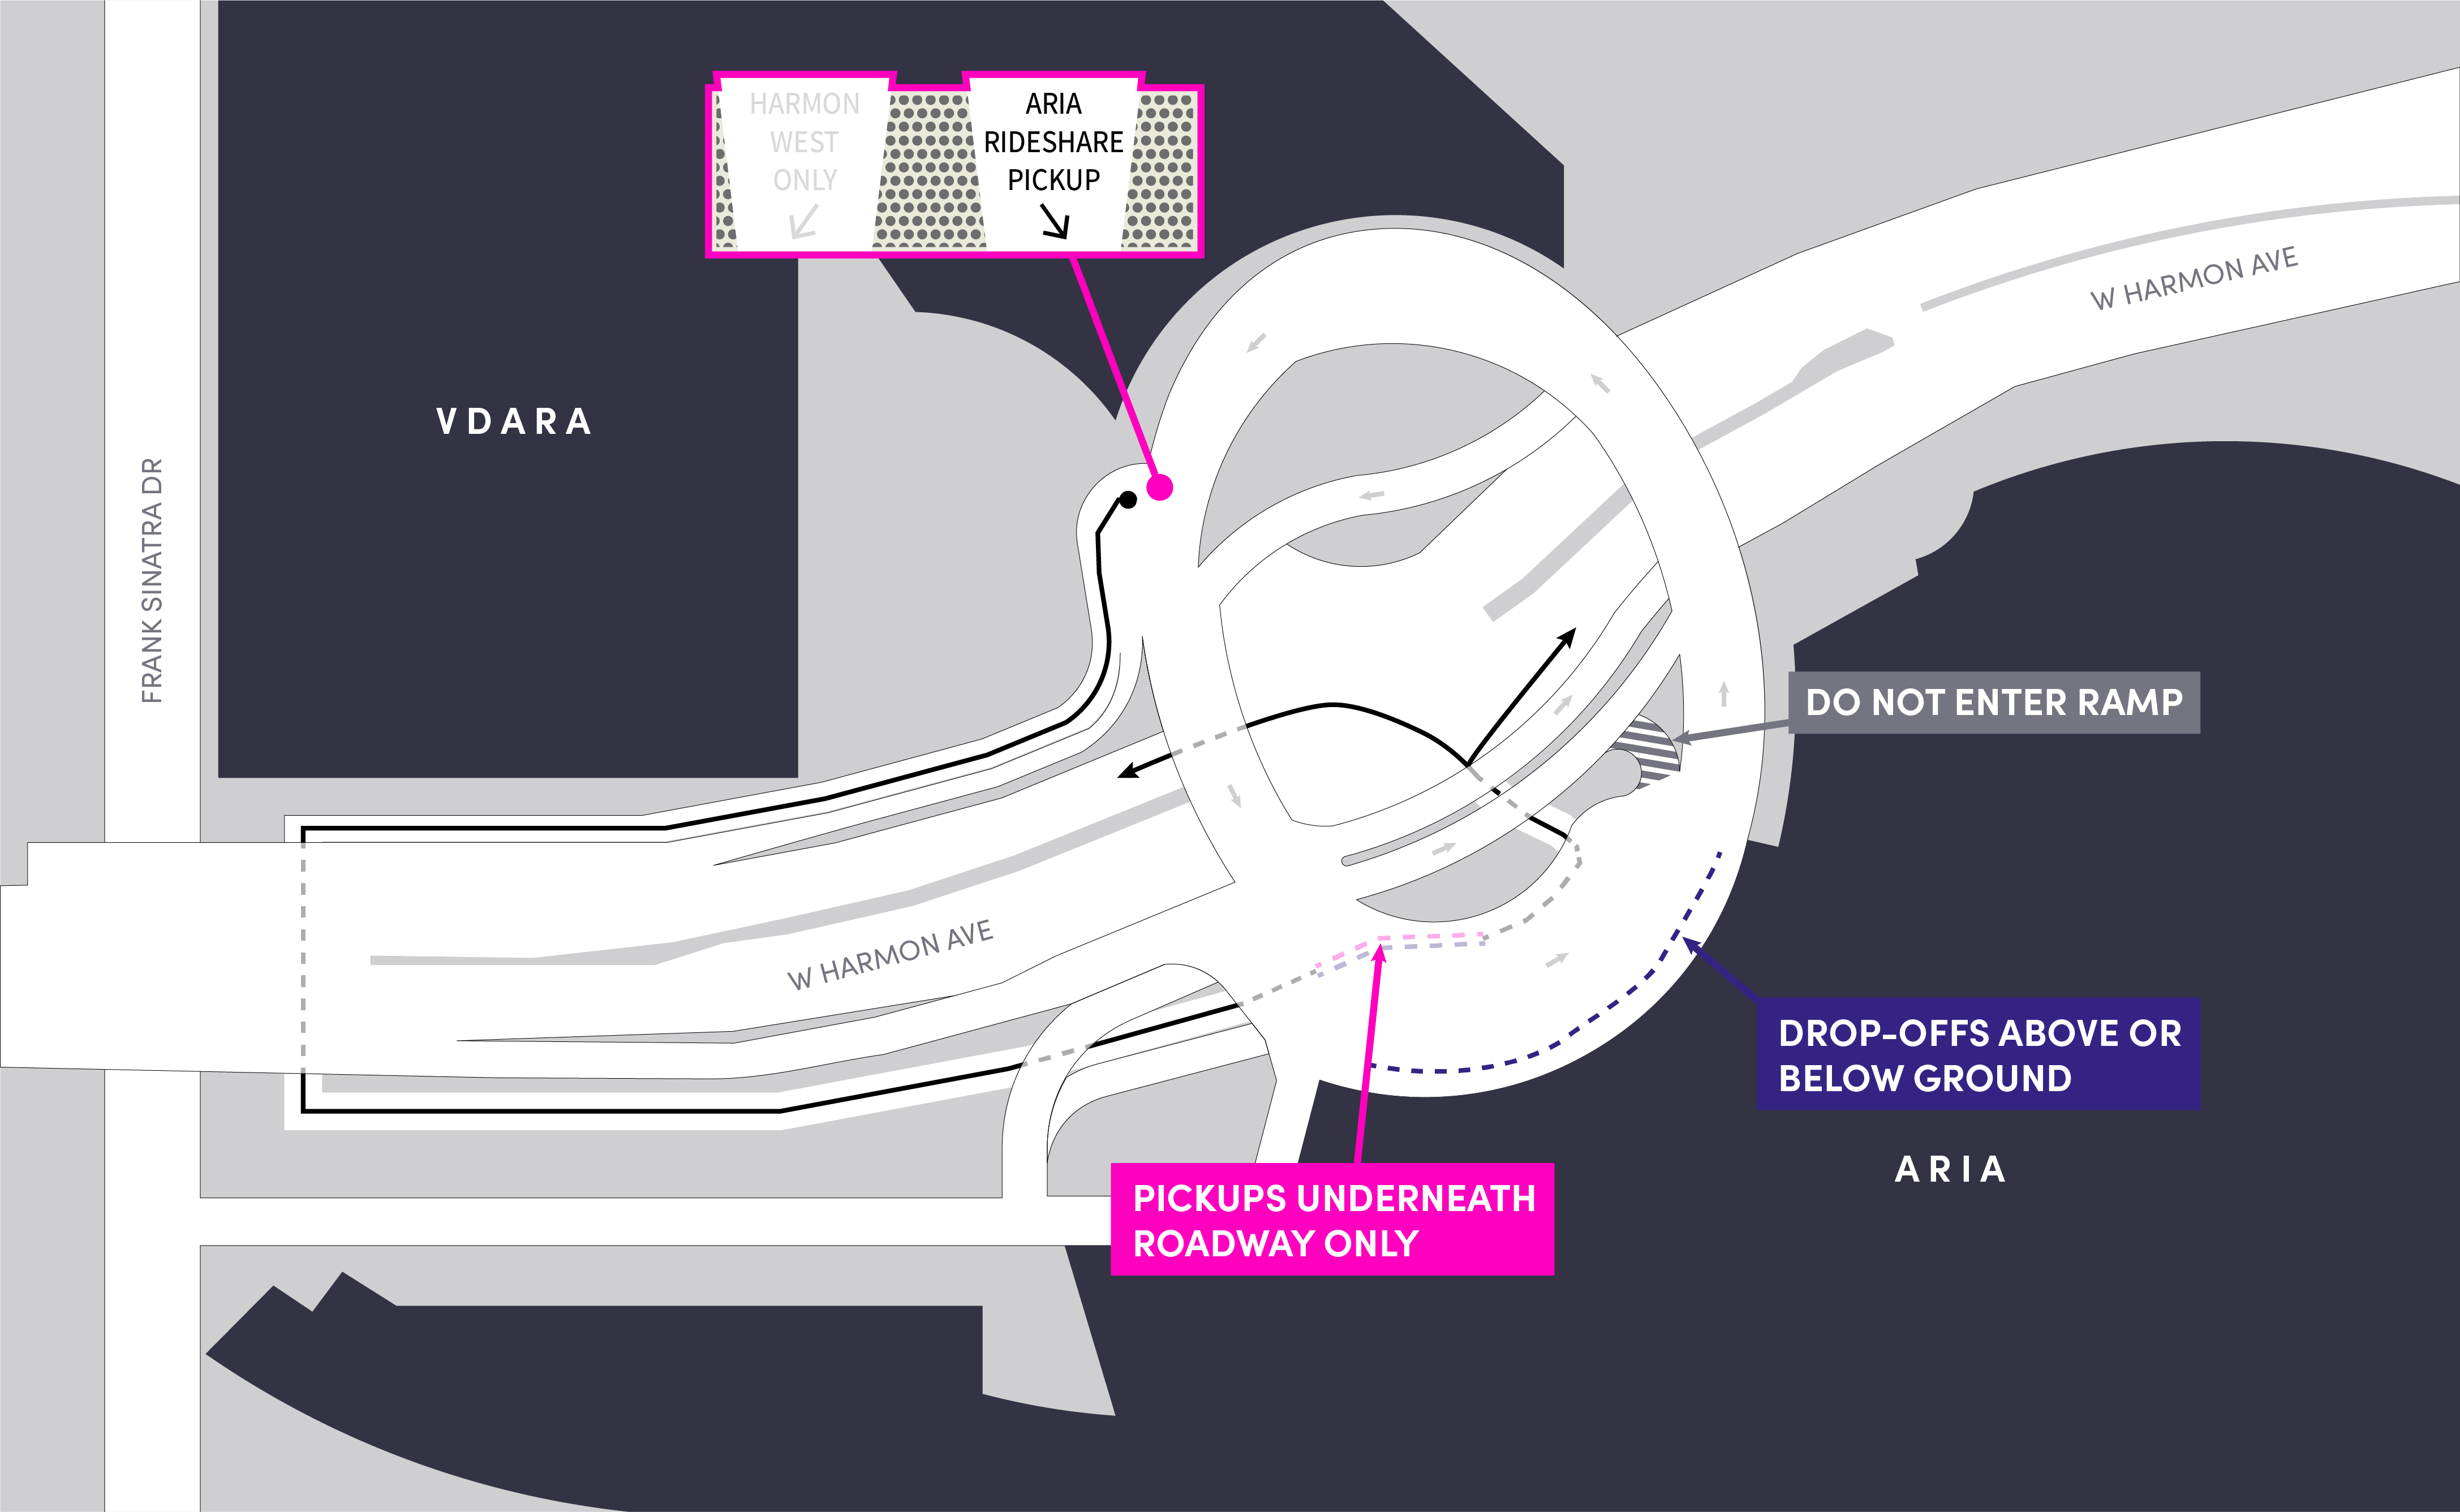 This image shows a map of the Aria, including pickup and dropoff areas.